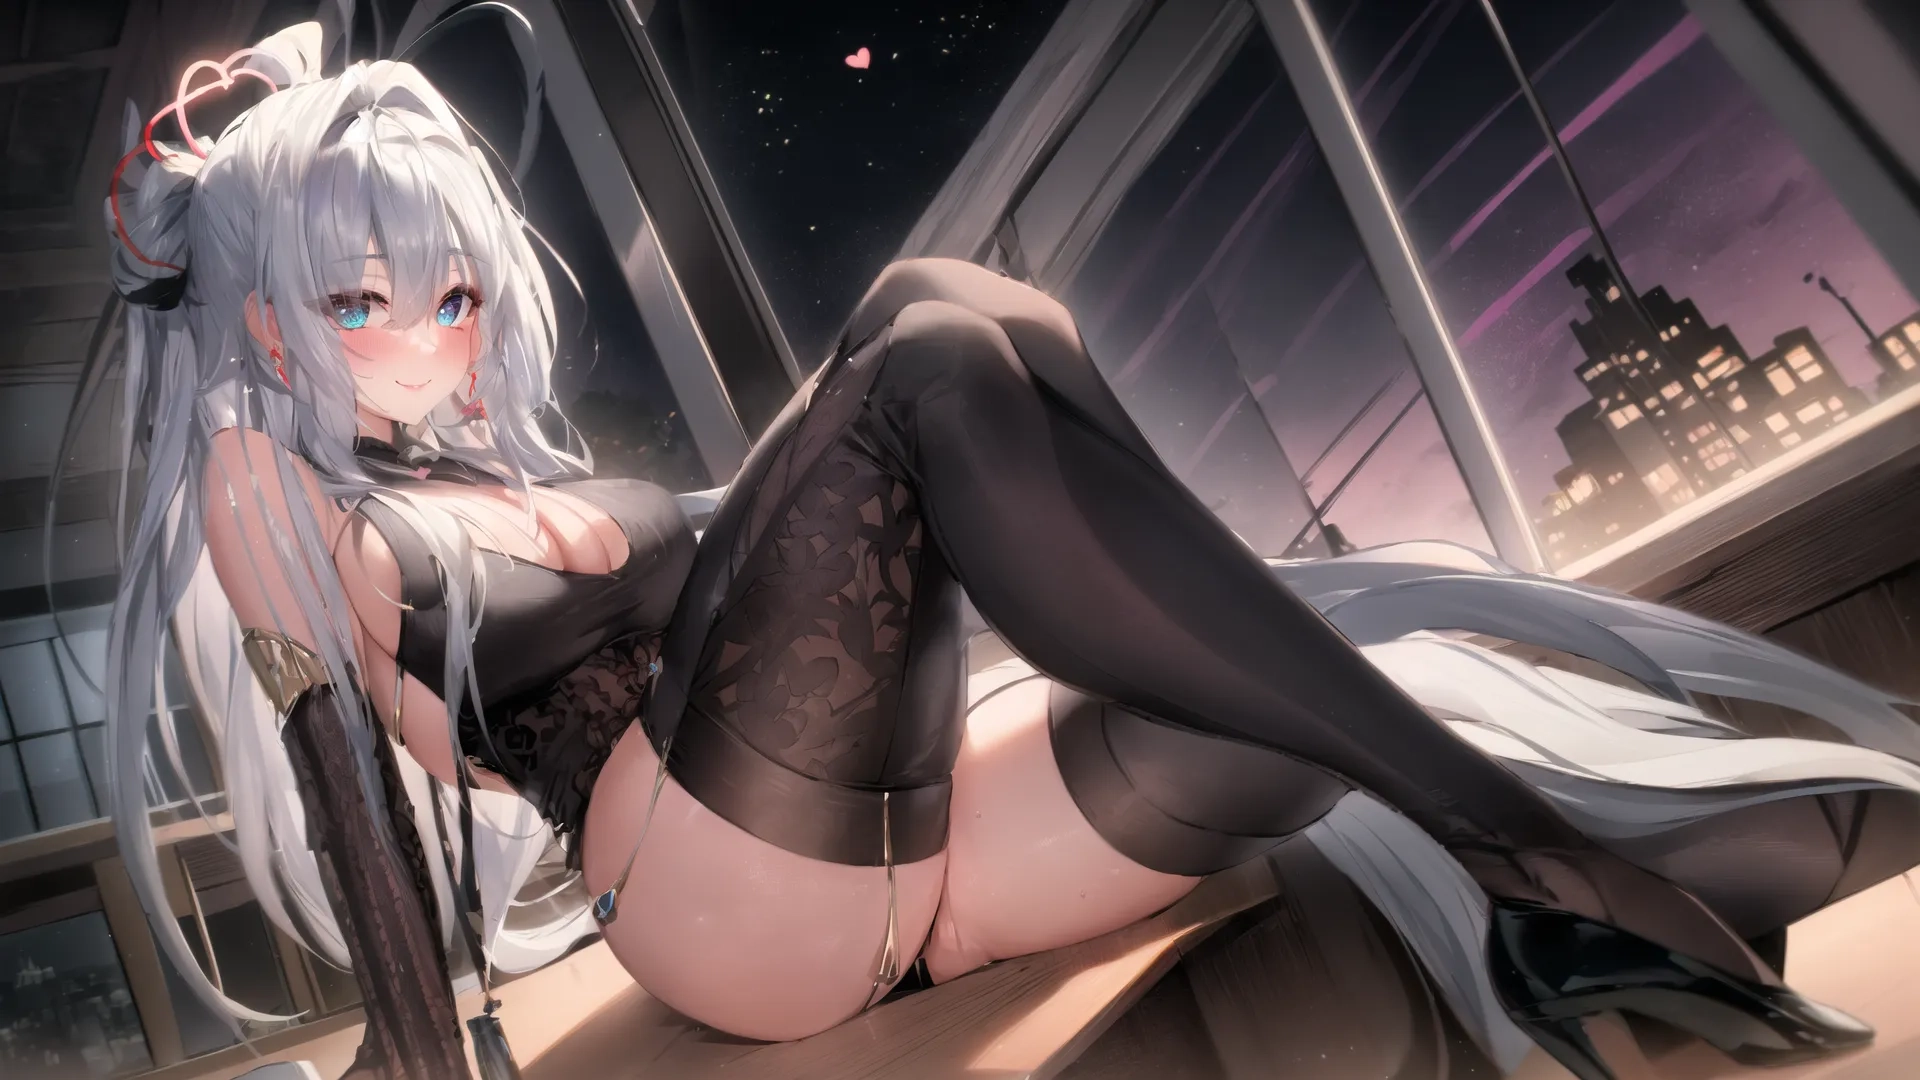 anime - style girl in stockings laying on floor in front of large window looking out at city skyline with big moon above and clouds above, as she has bare butt,
